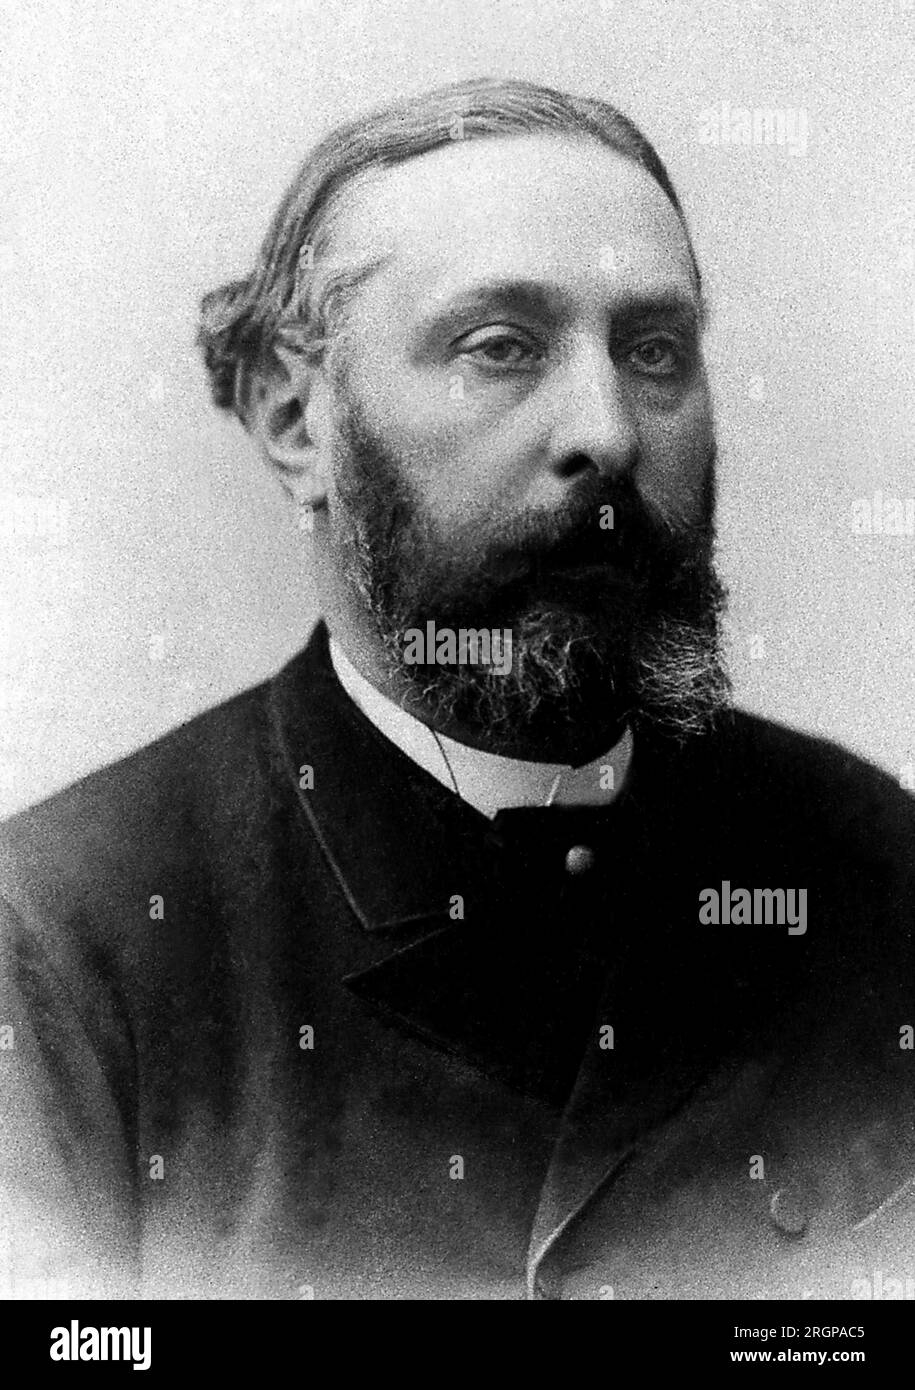 Sully Prudhomme (Armand Sully-Prudhomme dit) (Sully Prud'homme, Sully Prud'homme) (1839-1907), Poete parnassien, essayiste et critique francais. Stockfoto